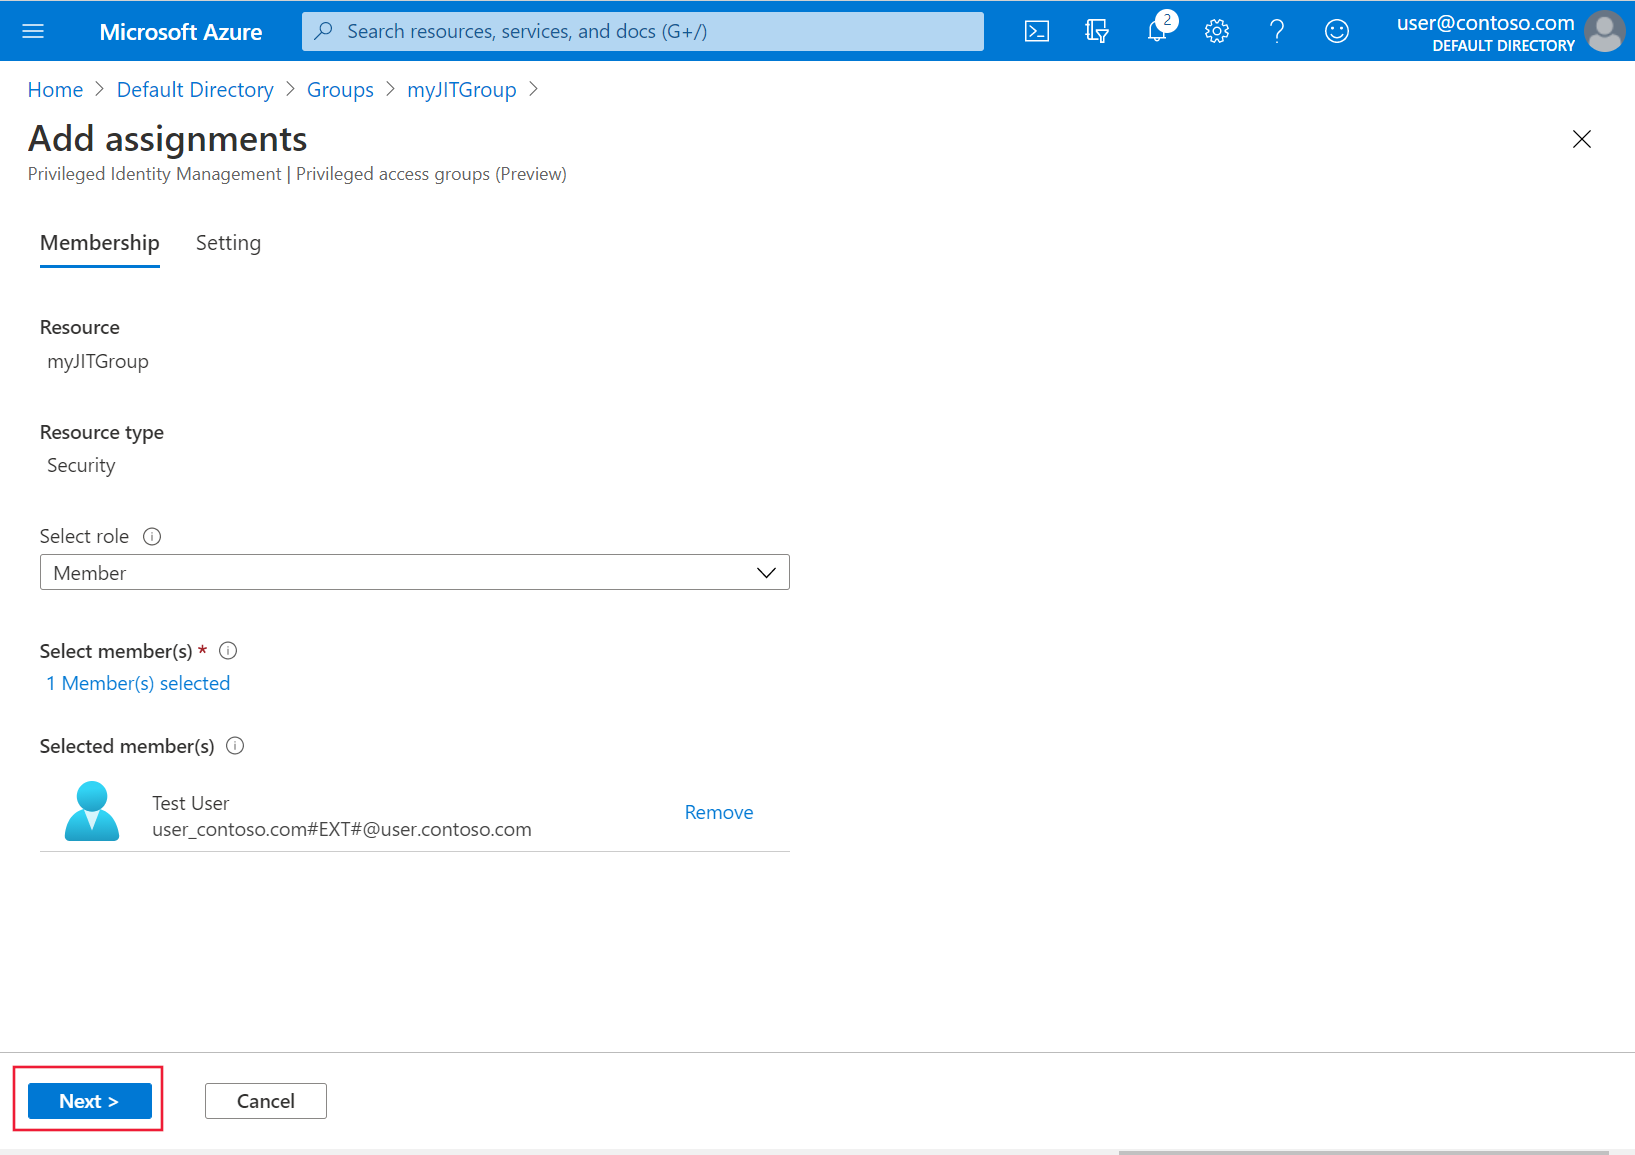 The Azure portal's Add assignments Membership screen is shown, with a sample user selected to be added as a member. The option 'Next' is highlighted.